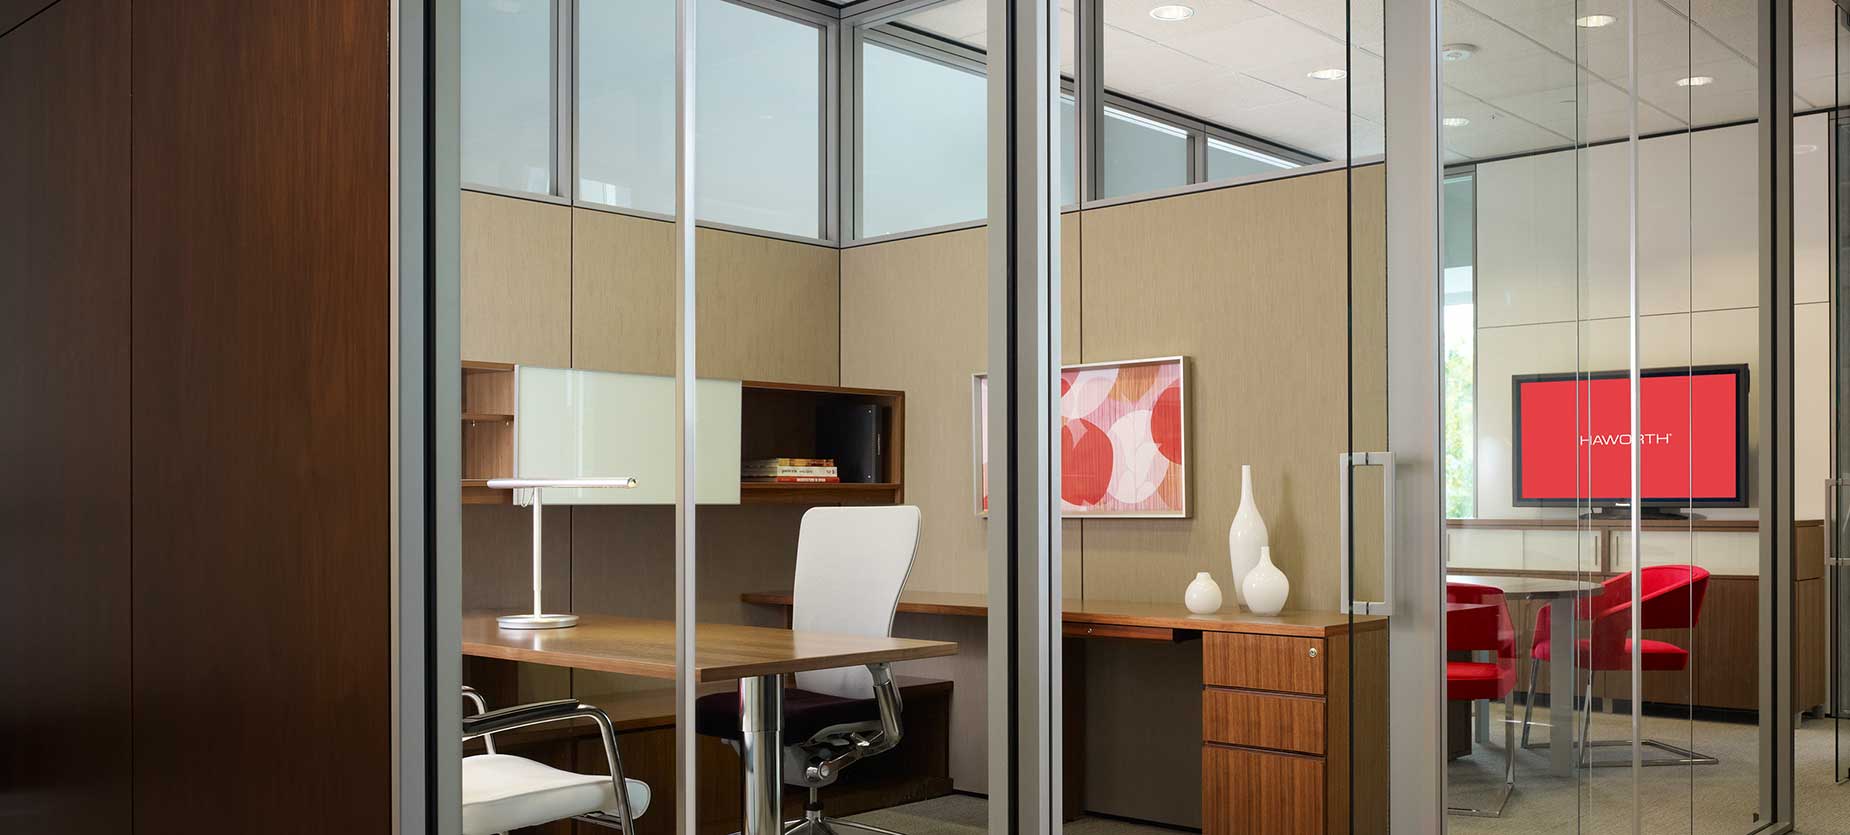 This traditional private office supports both focused, heads-down work as well as transactional interaction with guests. Additionally, it provides both open and enclosed storage, as well as surfaces to annotate, pin up, and personalize this c-suite positioned office with accessories.